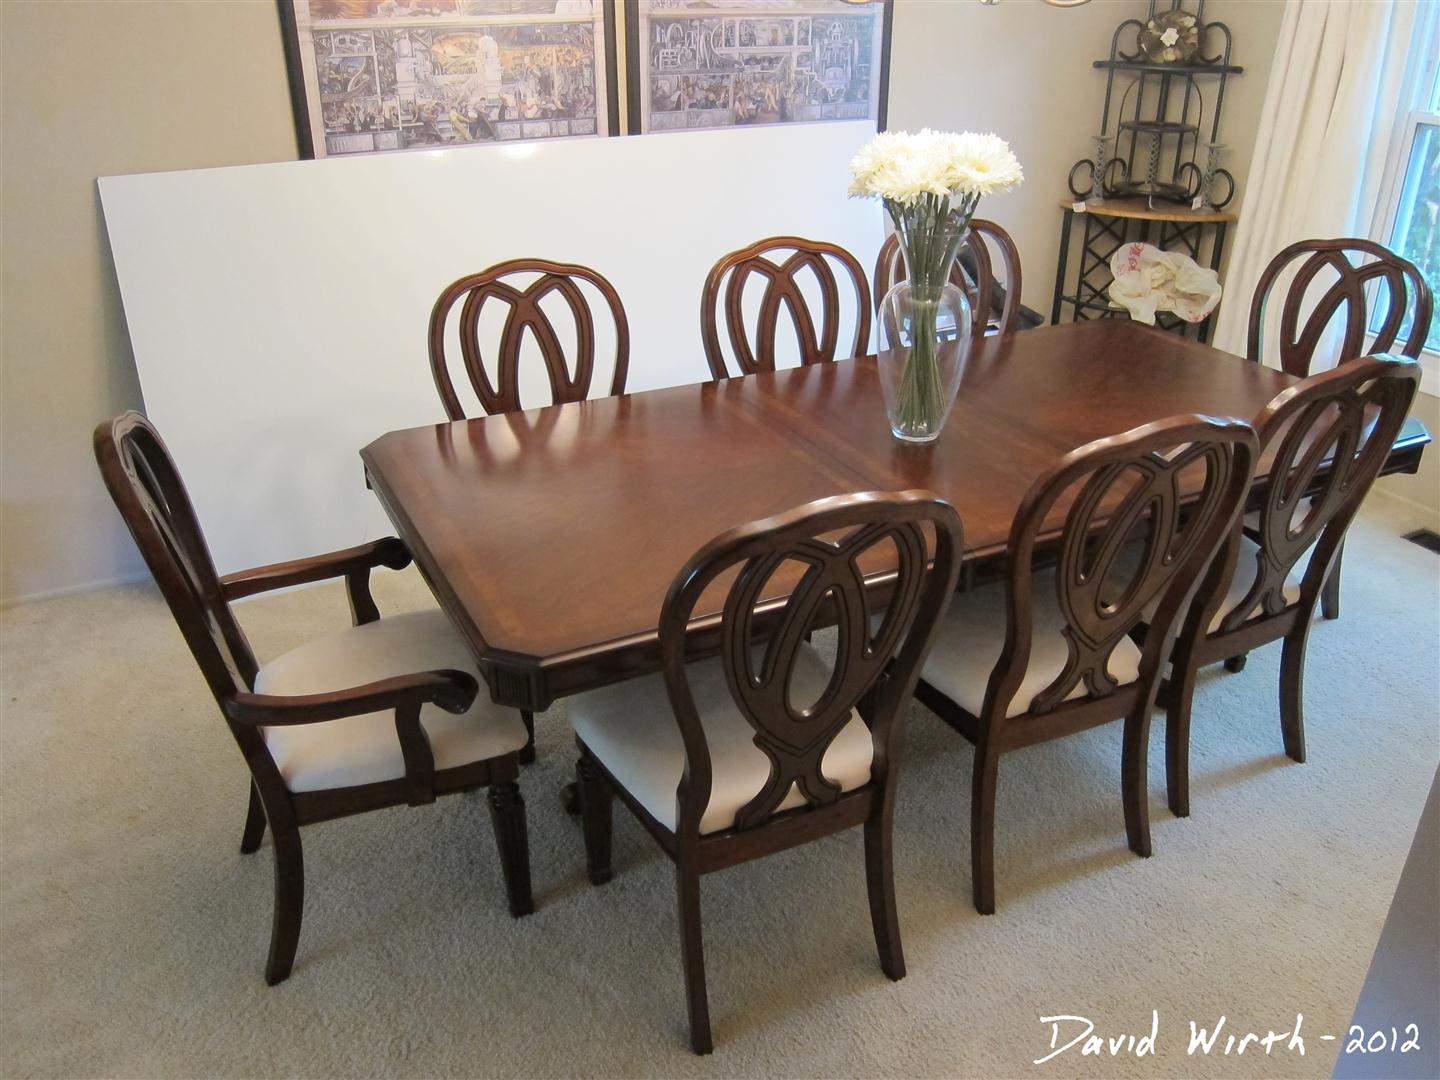 New Dining Room Table And Chairs, Craigslist Dining Room Set